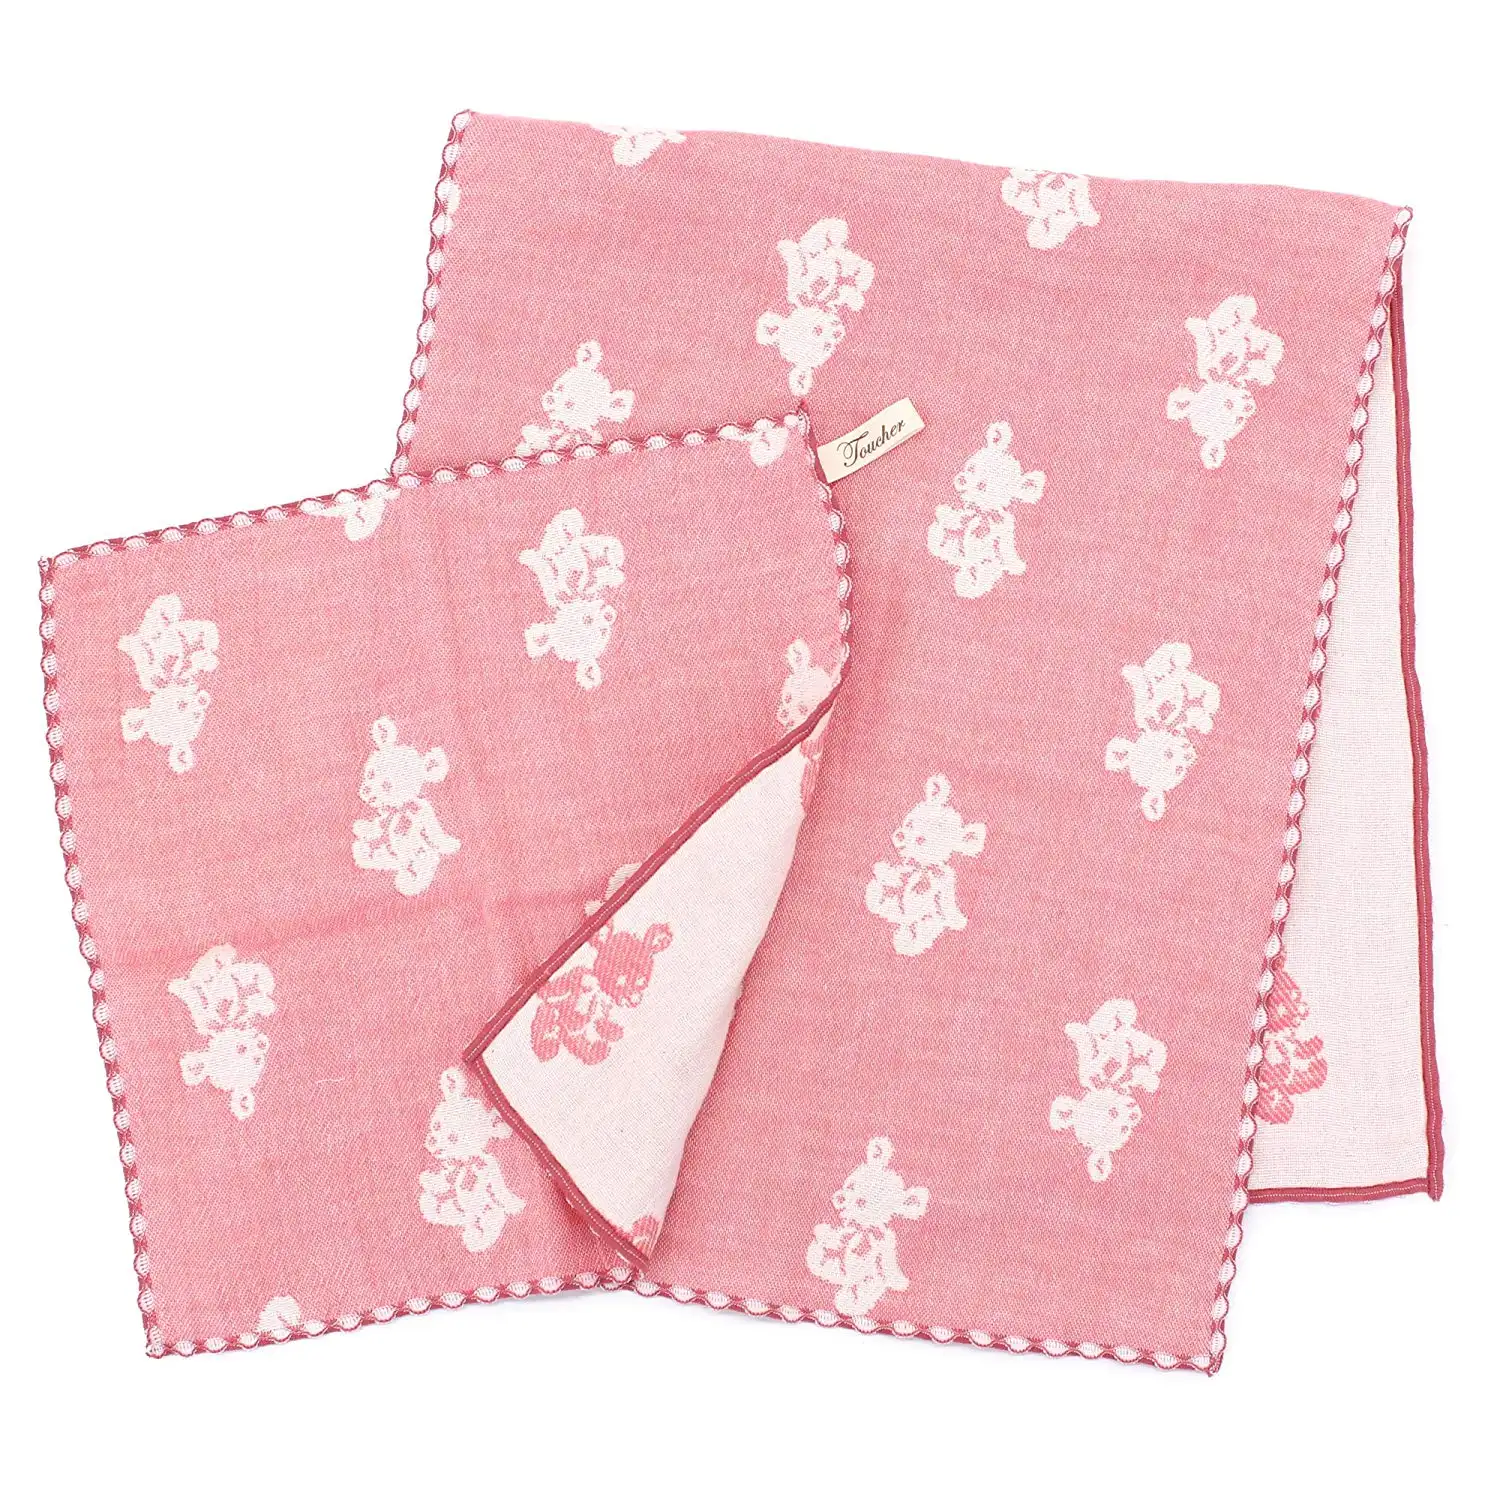 [Wholesale Products] Made in Japan 4-Layered Gauze Hand Towel Face Towel 34cm*80cm 100% Cotton Breathable Low MOQ Soft Pink